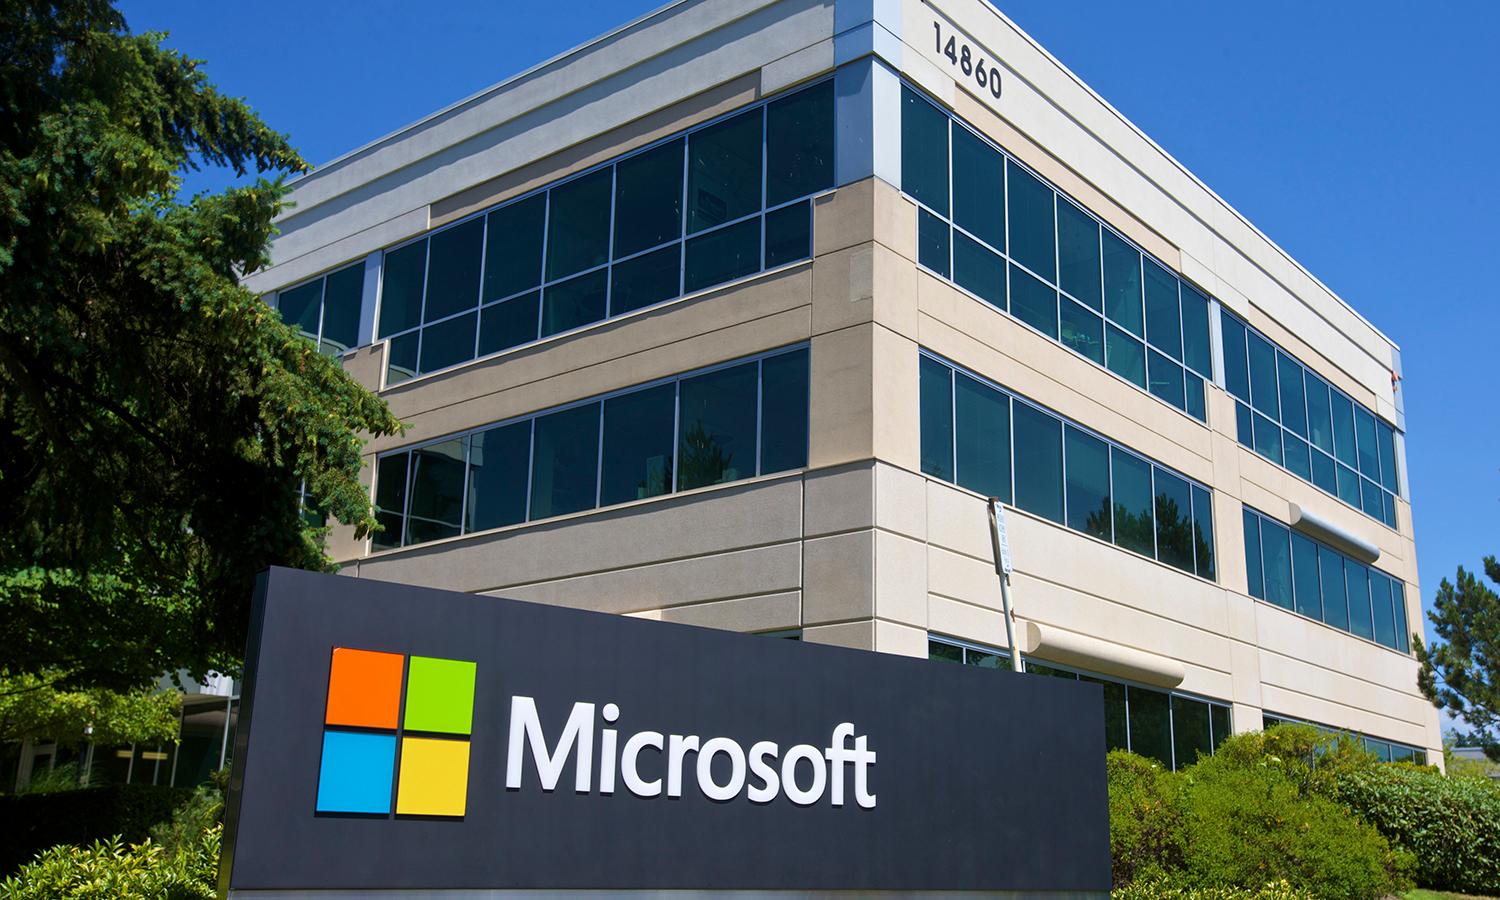 A building on the Microsoft headquarters campus is pictured July 17, 2014, in Redmond, Wash. (Stephen Brashear/Getty Images)